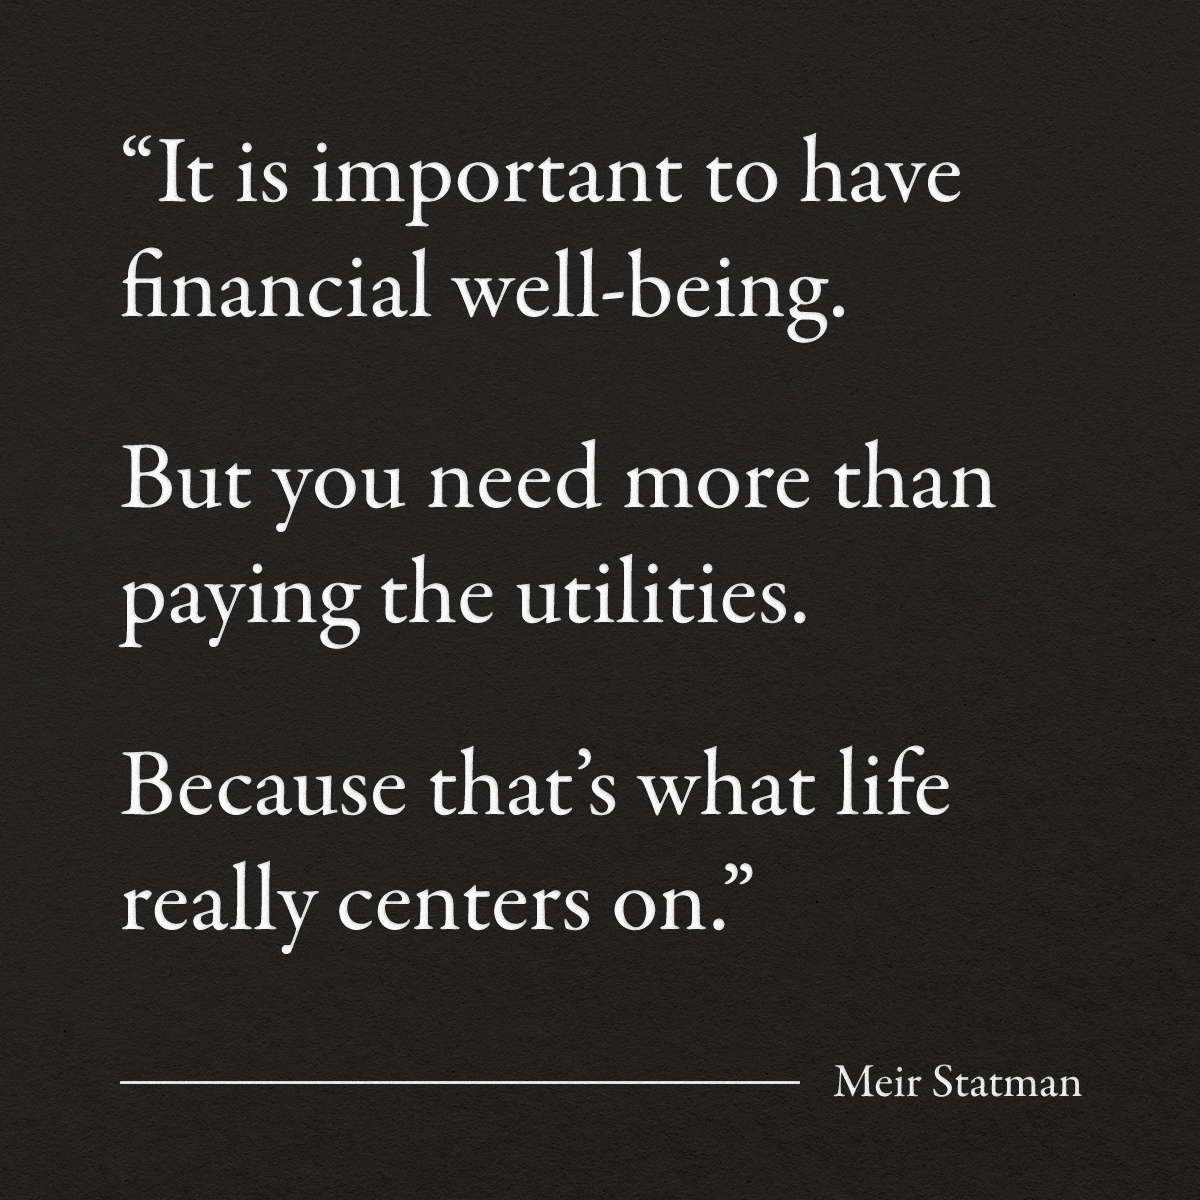 “It is important to have financial well-being. But you need more than paying the utilities. Because that’s what life really centers on.” – Meir Statman